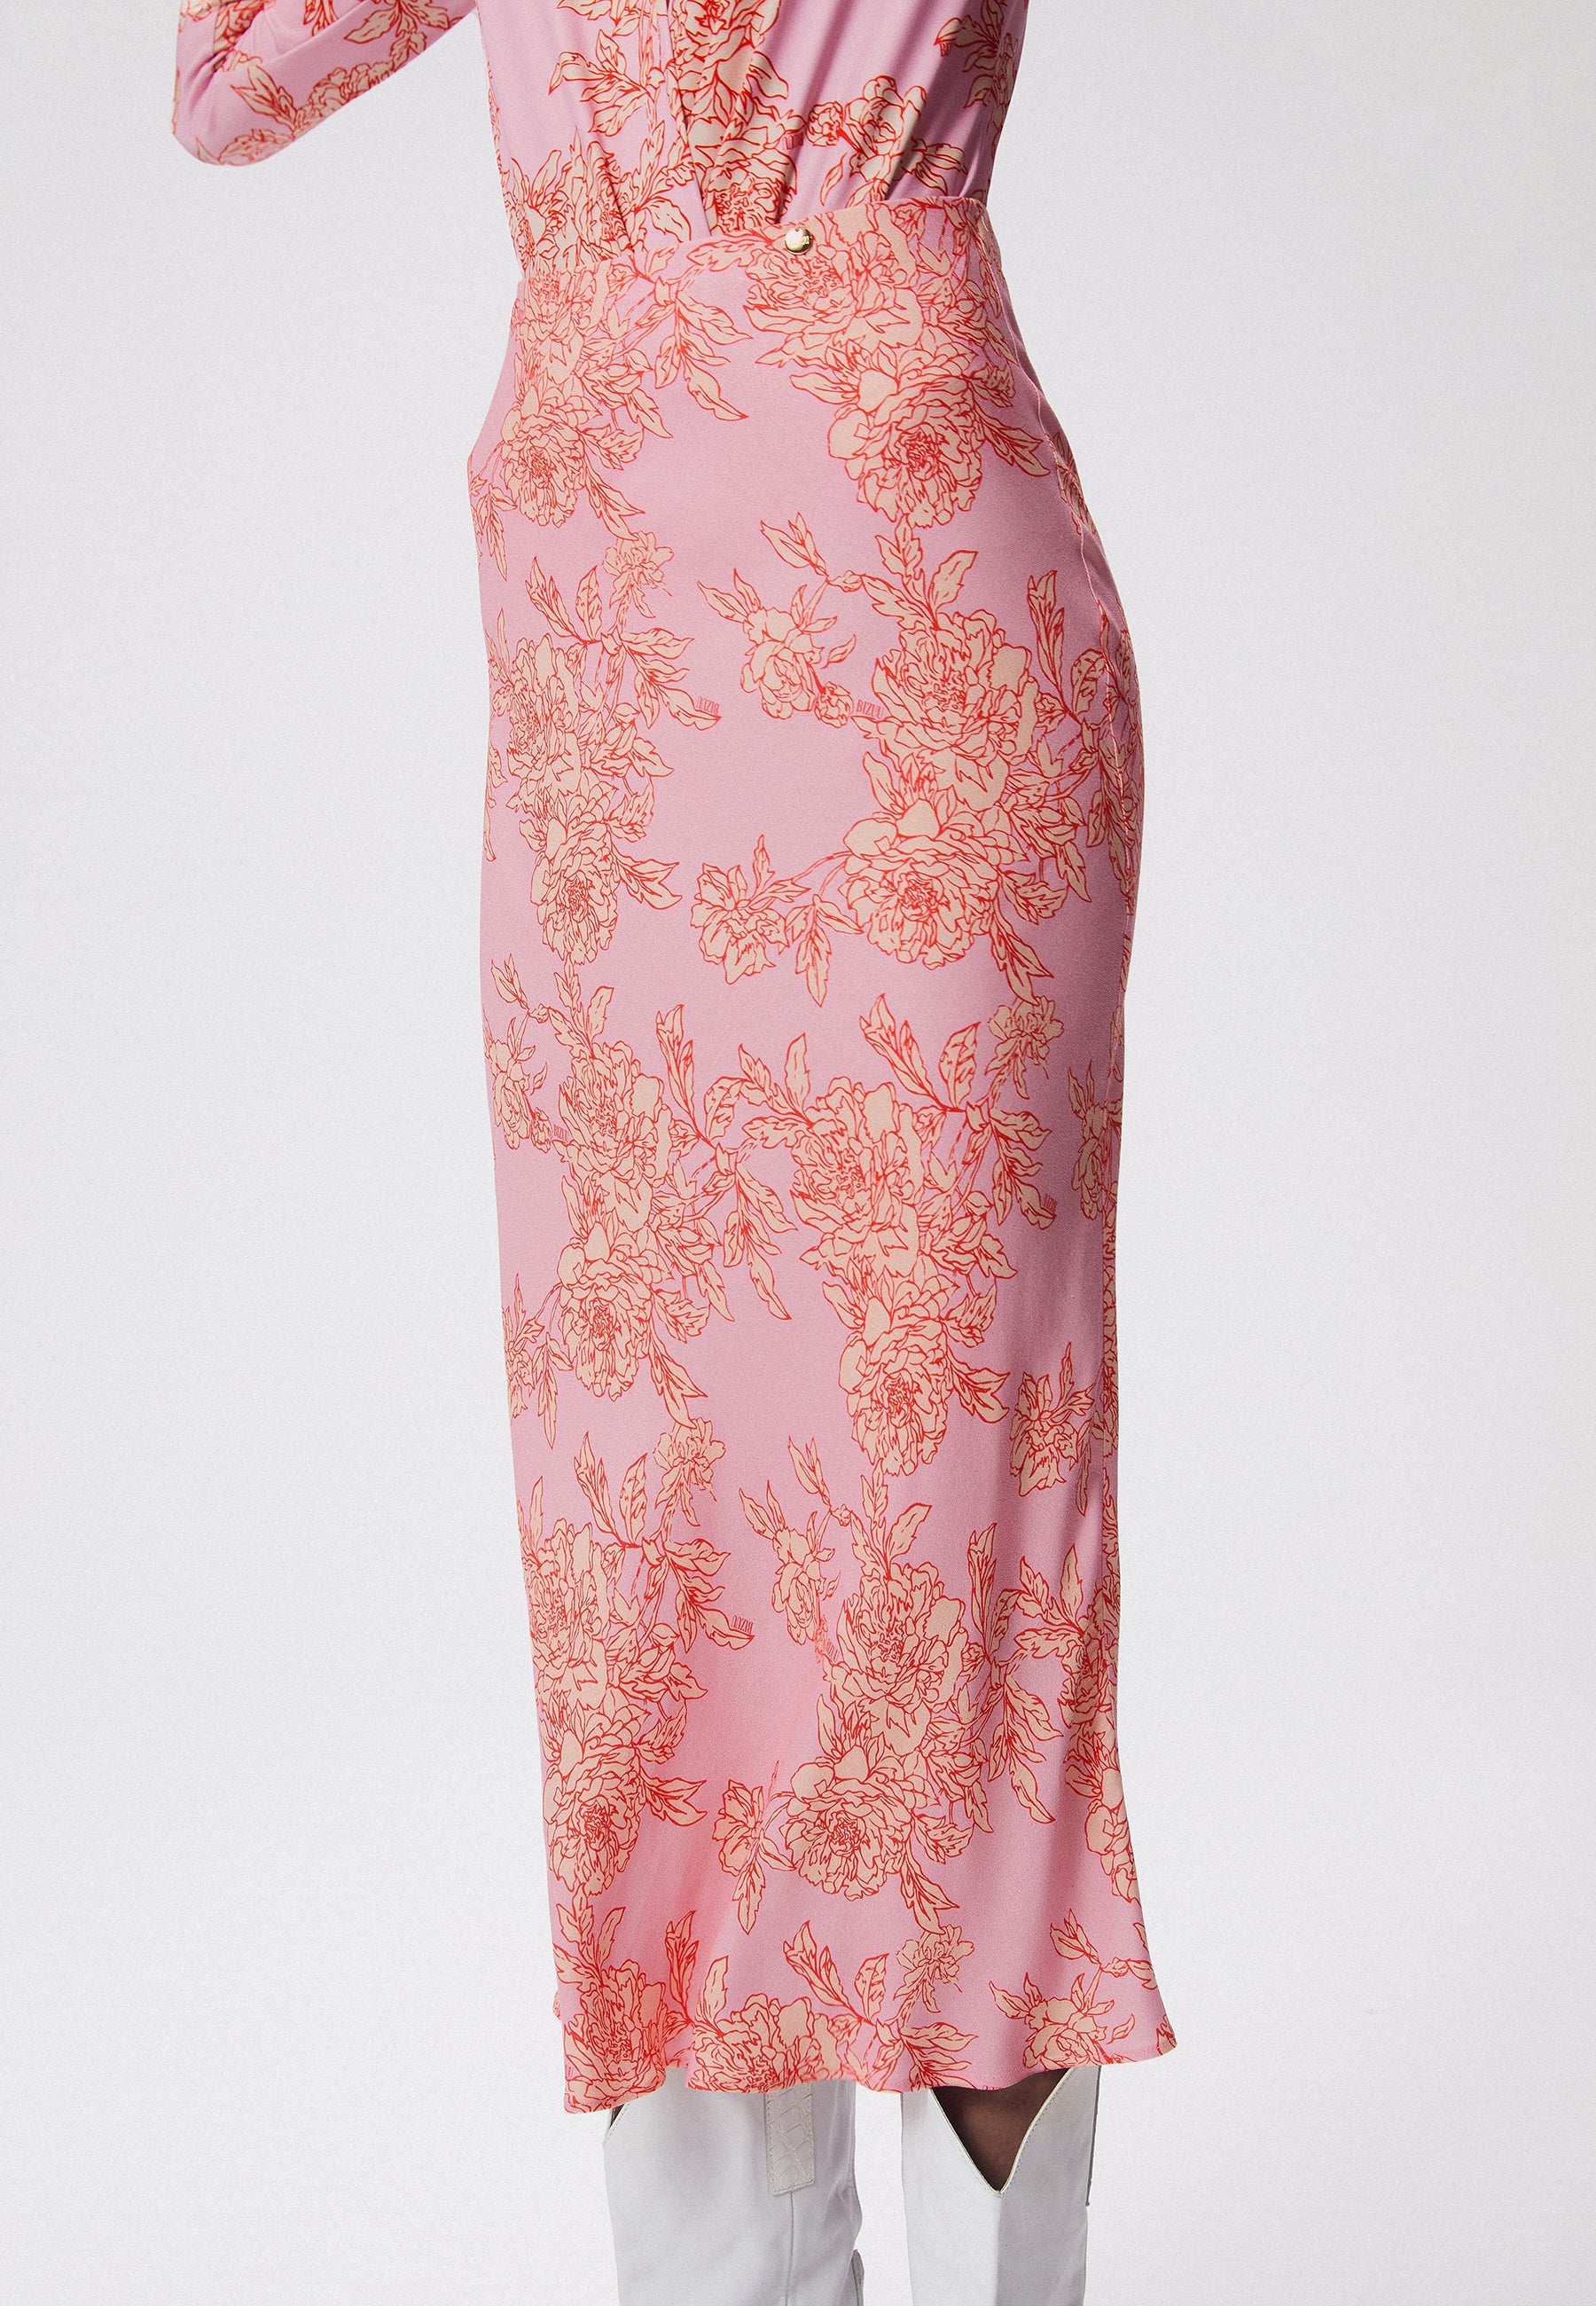 Midi skirt with floral print made of viscose BREE pink